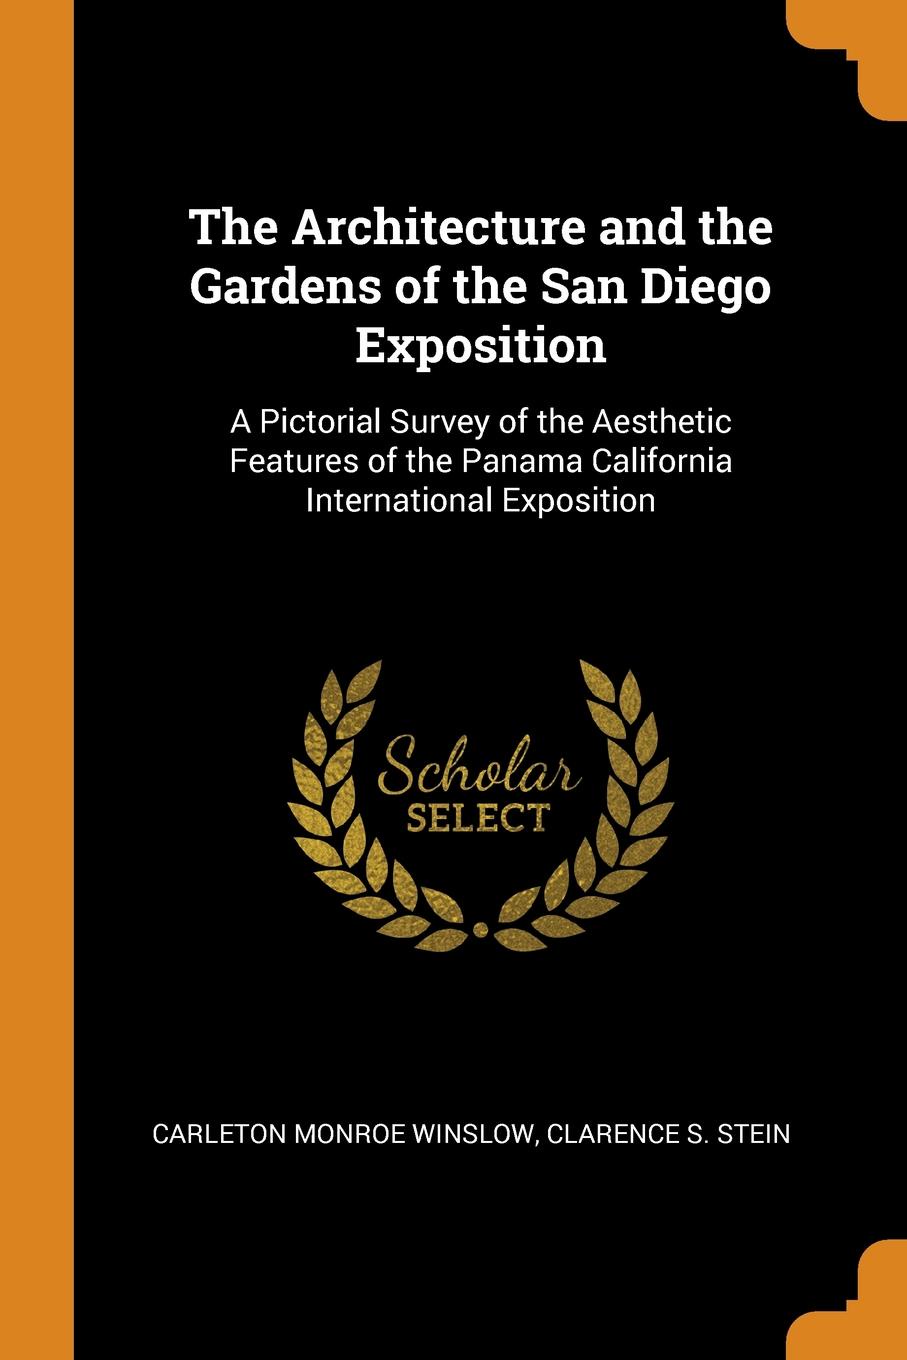 The Architecture and the Gardens of the San Diego Exposition. A Pictorial Survey of the Aesthetic Features of the Panama California International Exposition